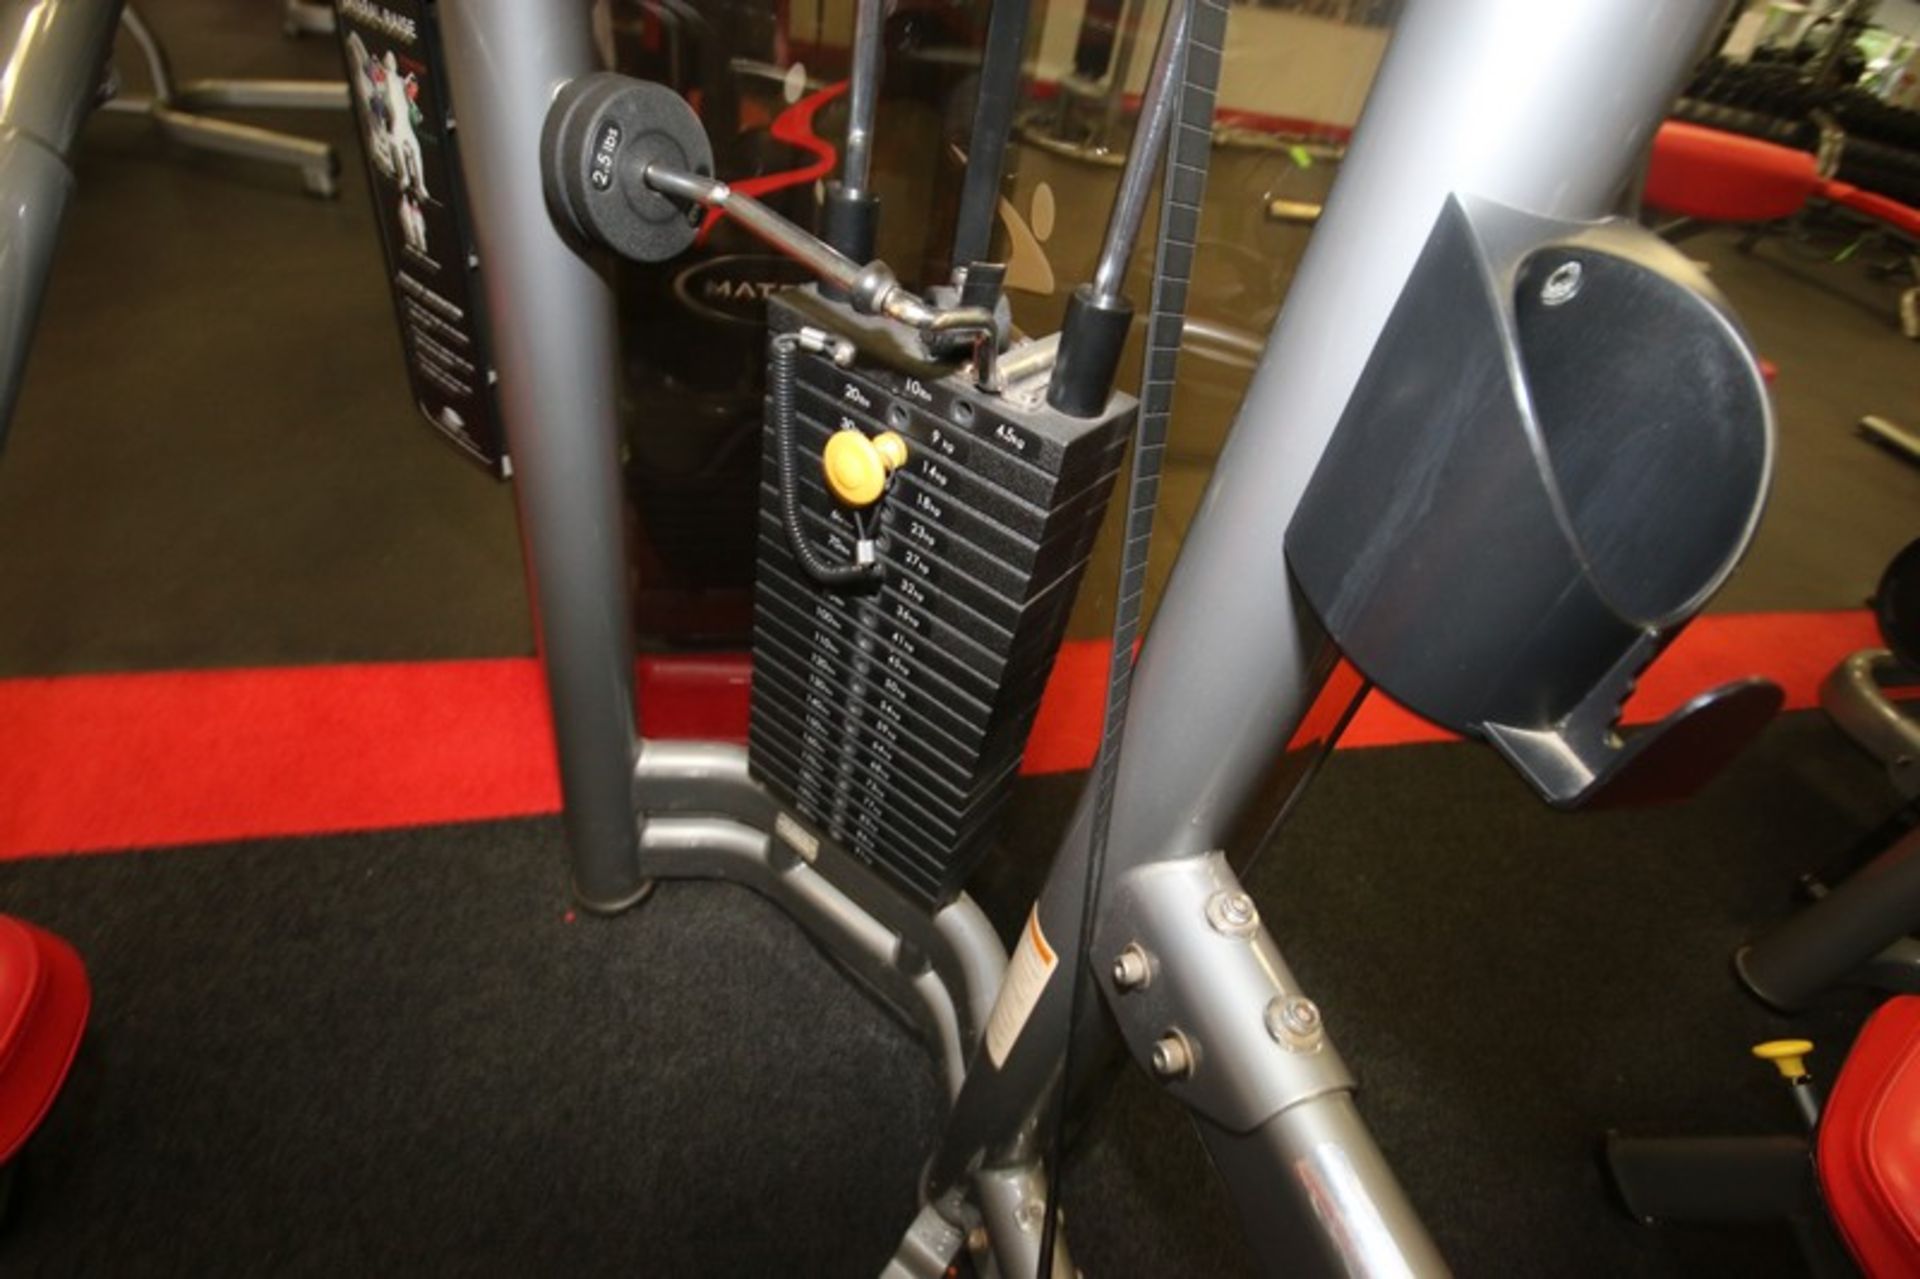 Matrix Lateral Raise Cable Machine, 10-200 lbs. Weight Range on Plates, Overall Dims.: Aprox. 48" - Image 4 of 5